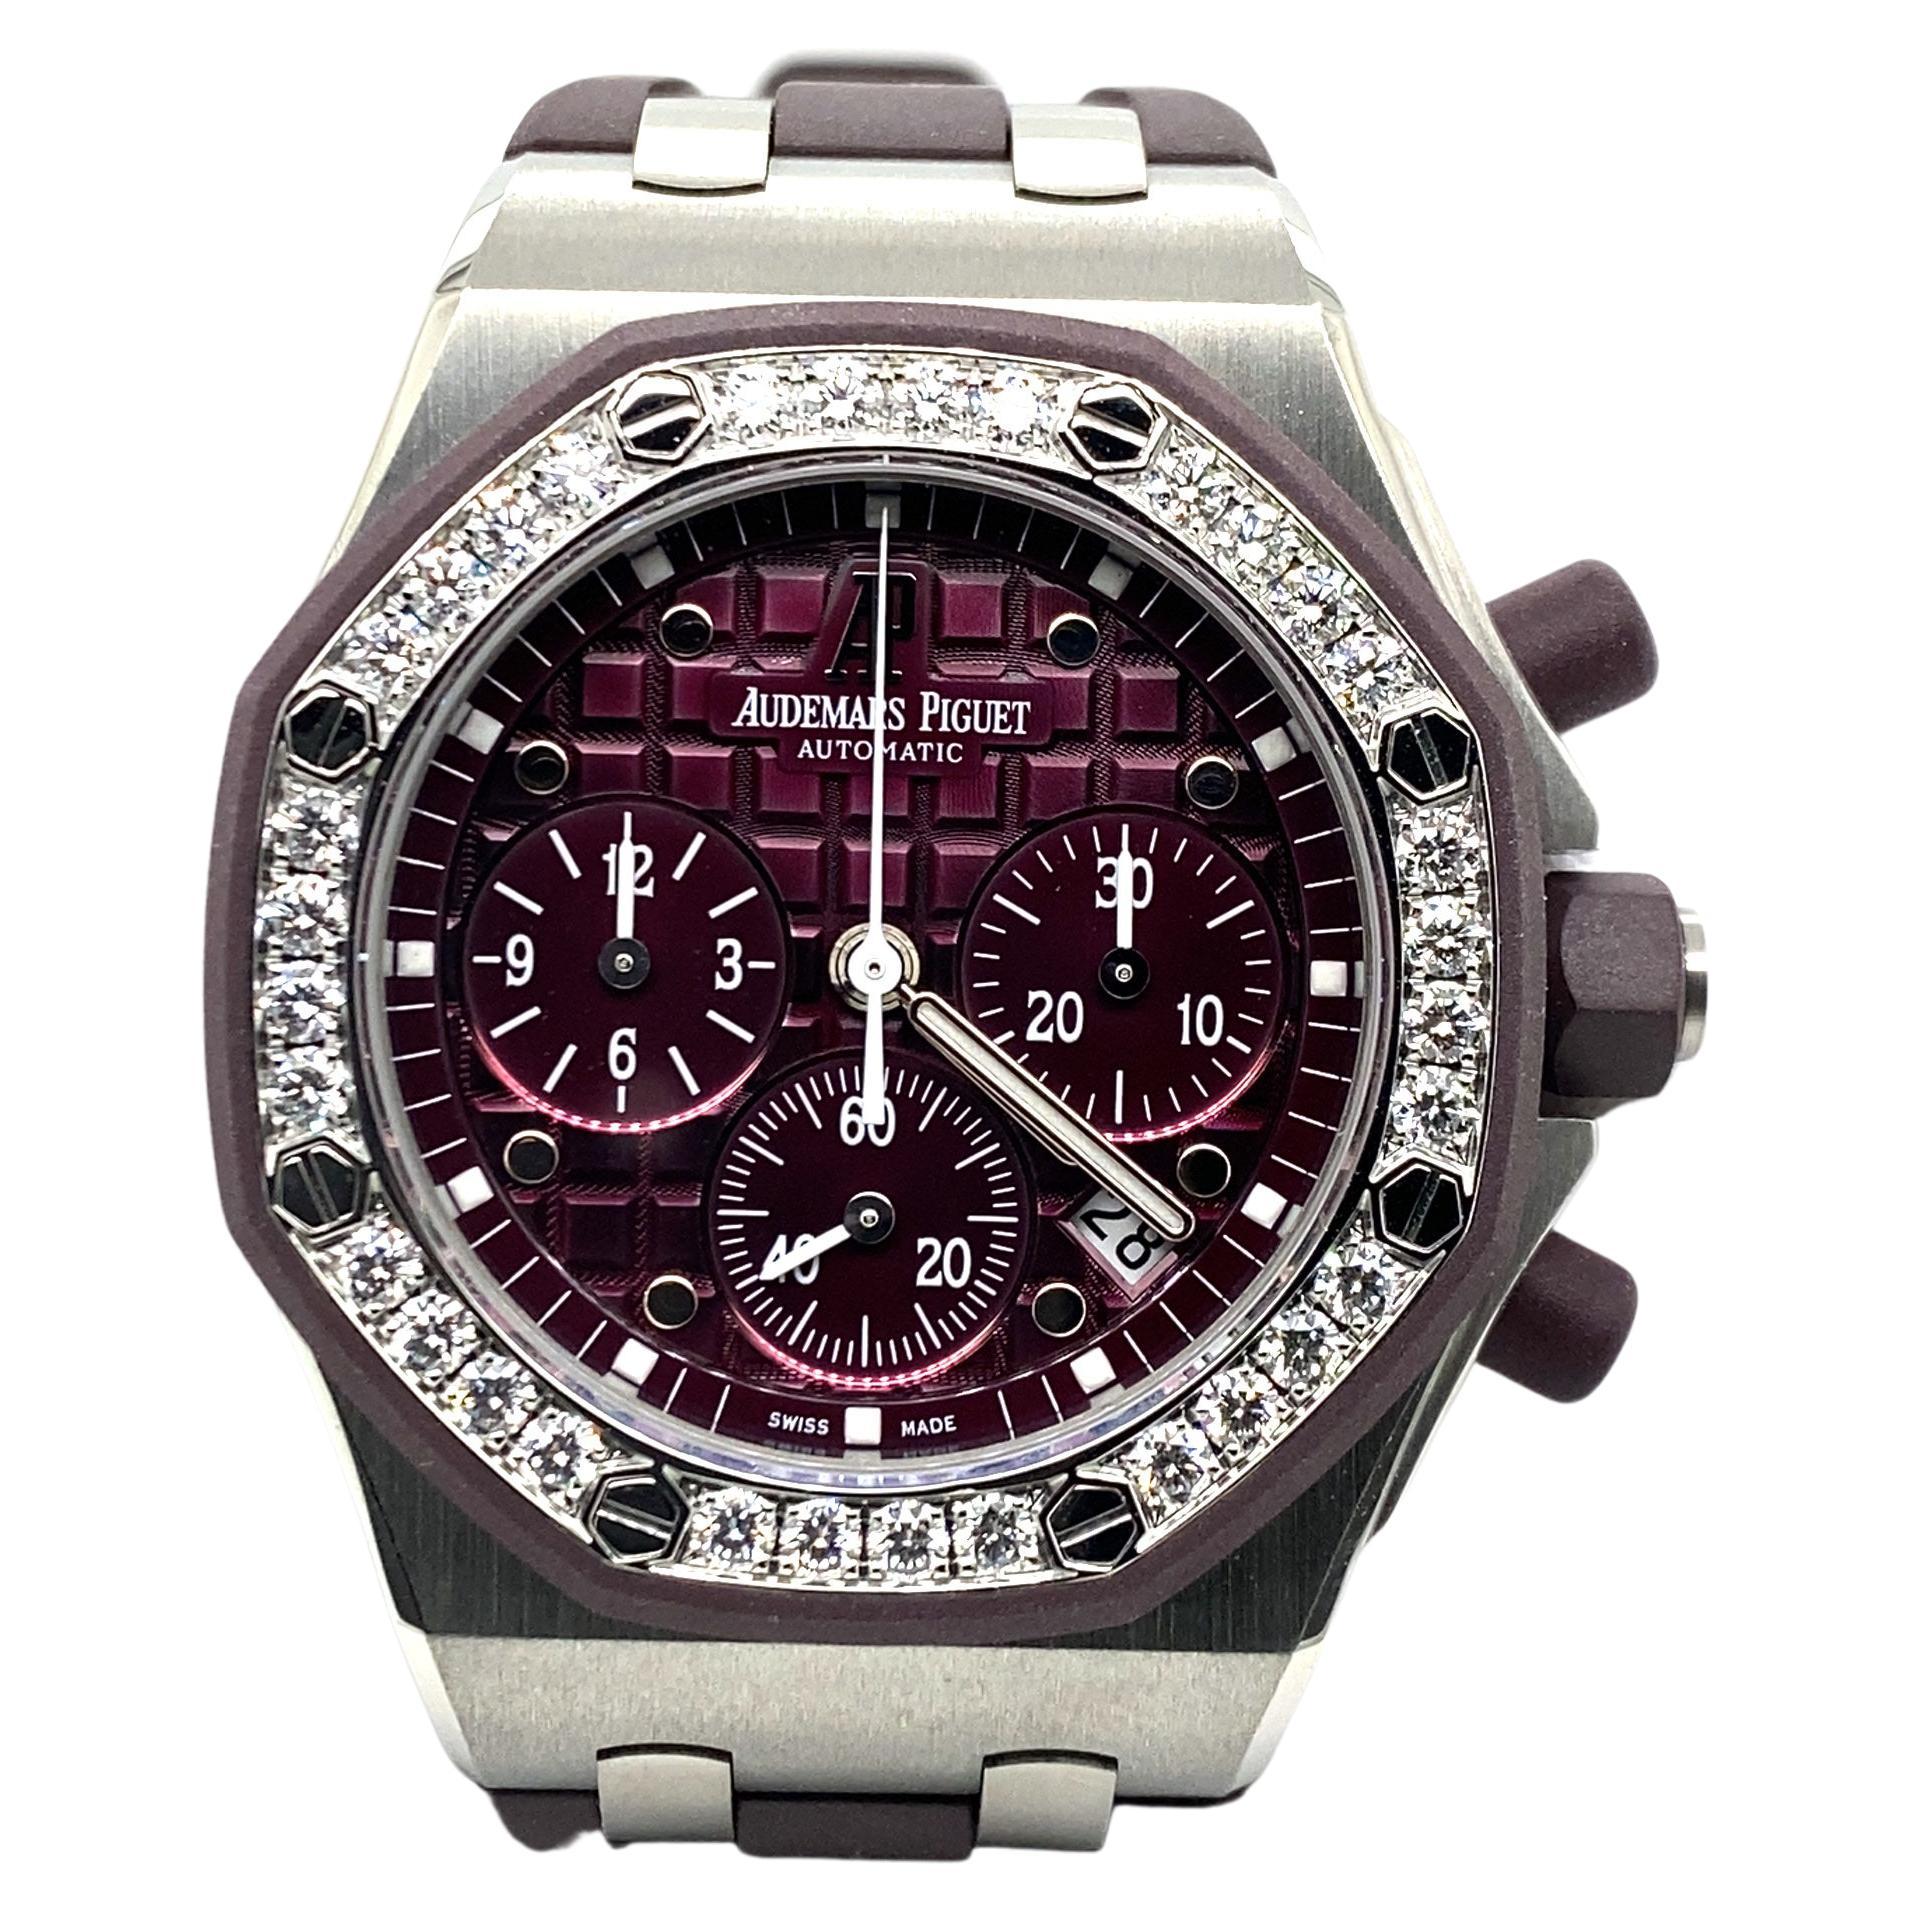 Audemars Piguet Royal Oak Offshore Chrono in Stainless Steel with Diamonds